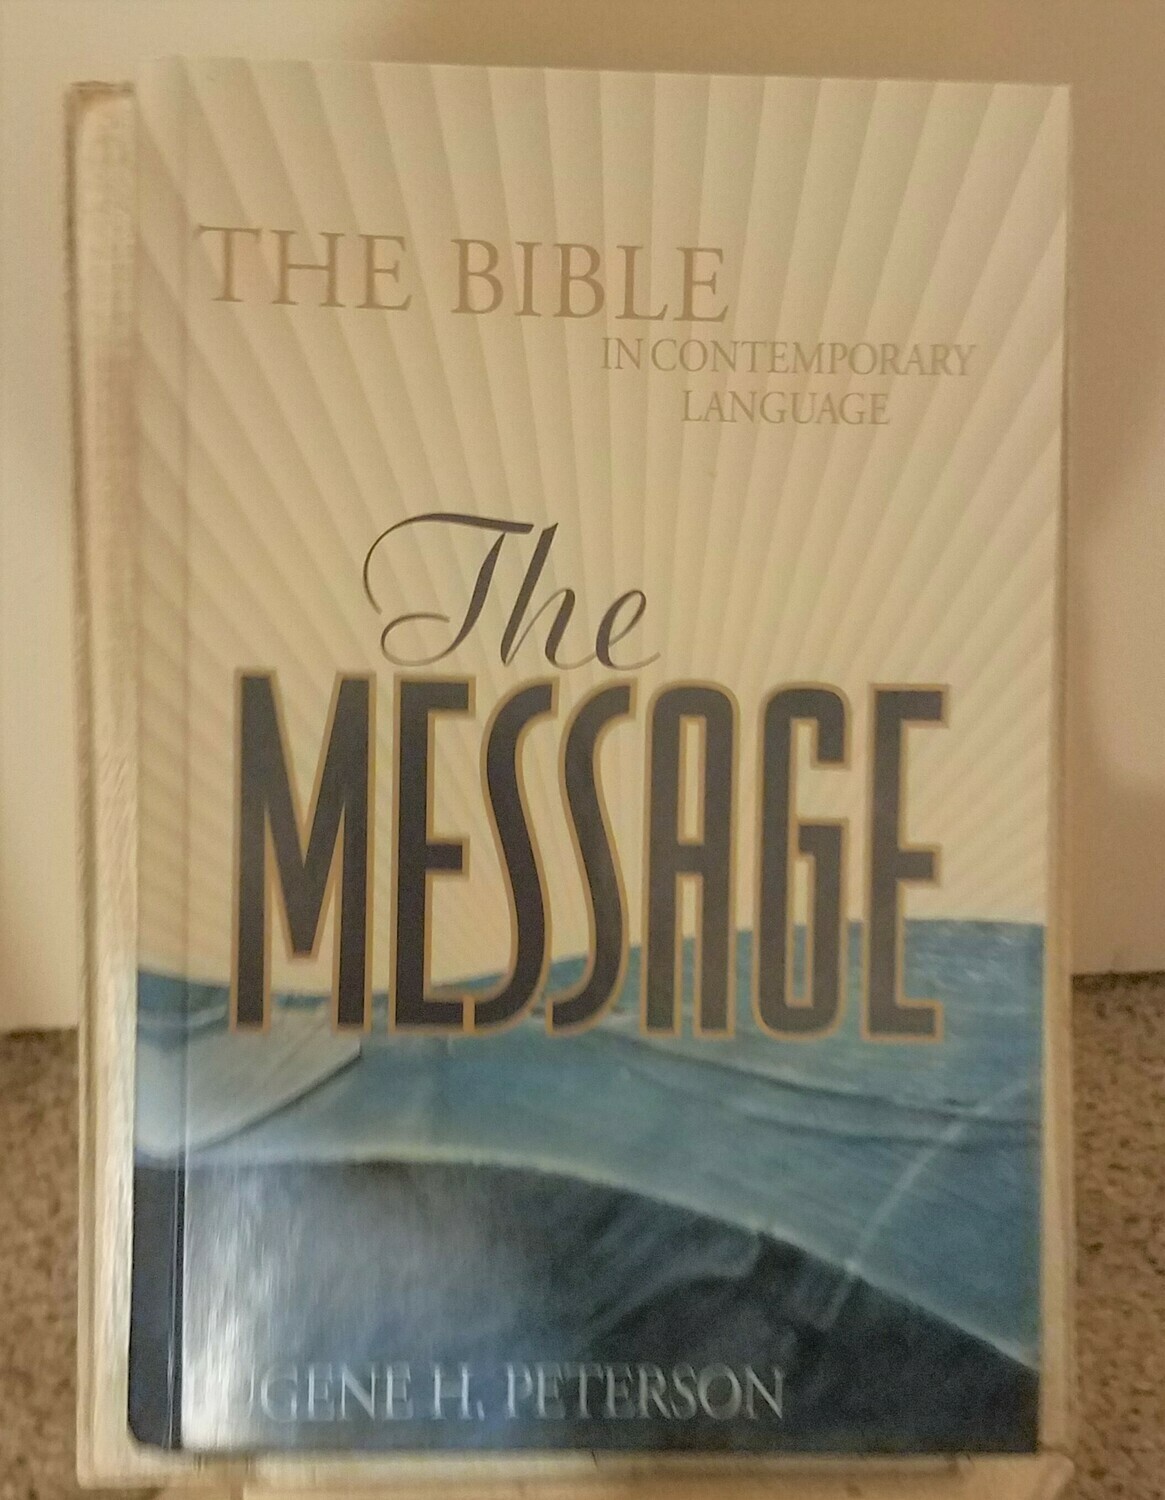 The Bible: The Message in Contemporary Language by Eugene H. Peterson